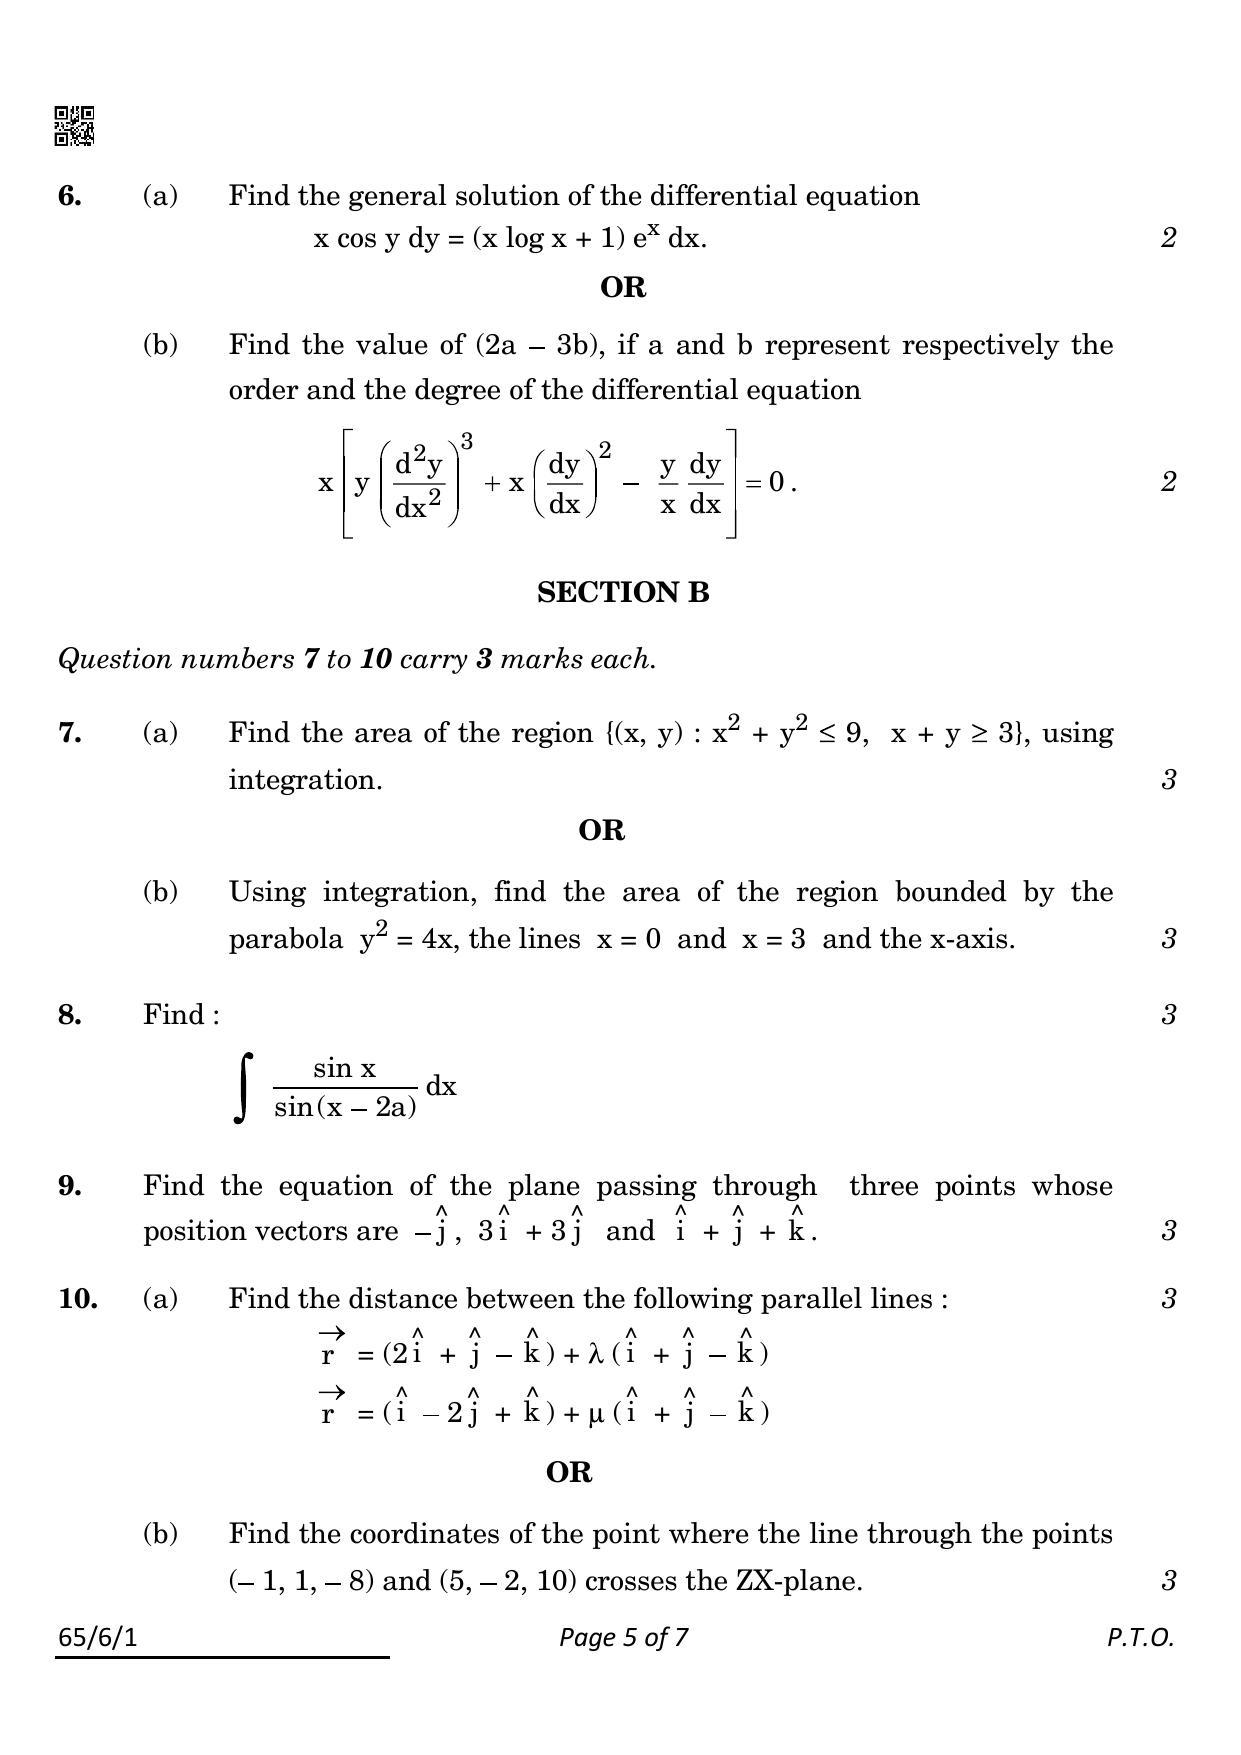 CBSE Class 12 65-6-1 MATHS 2022 Compartment Question Paper - Page 5